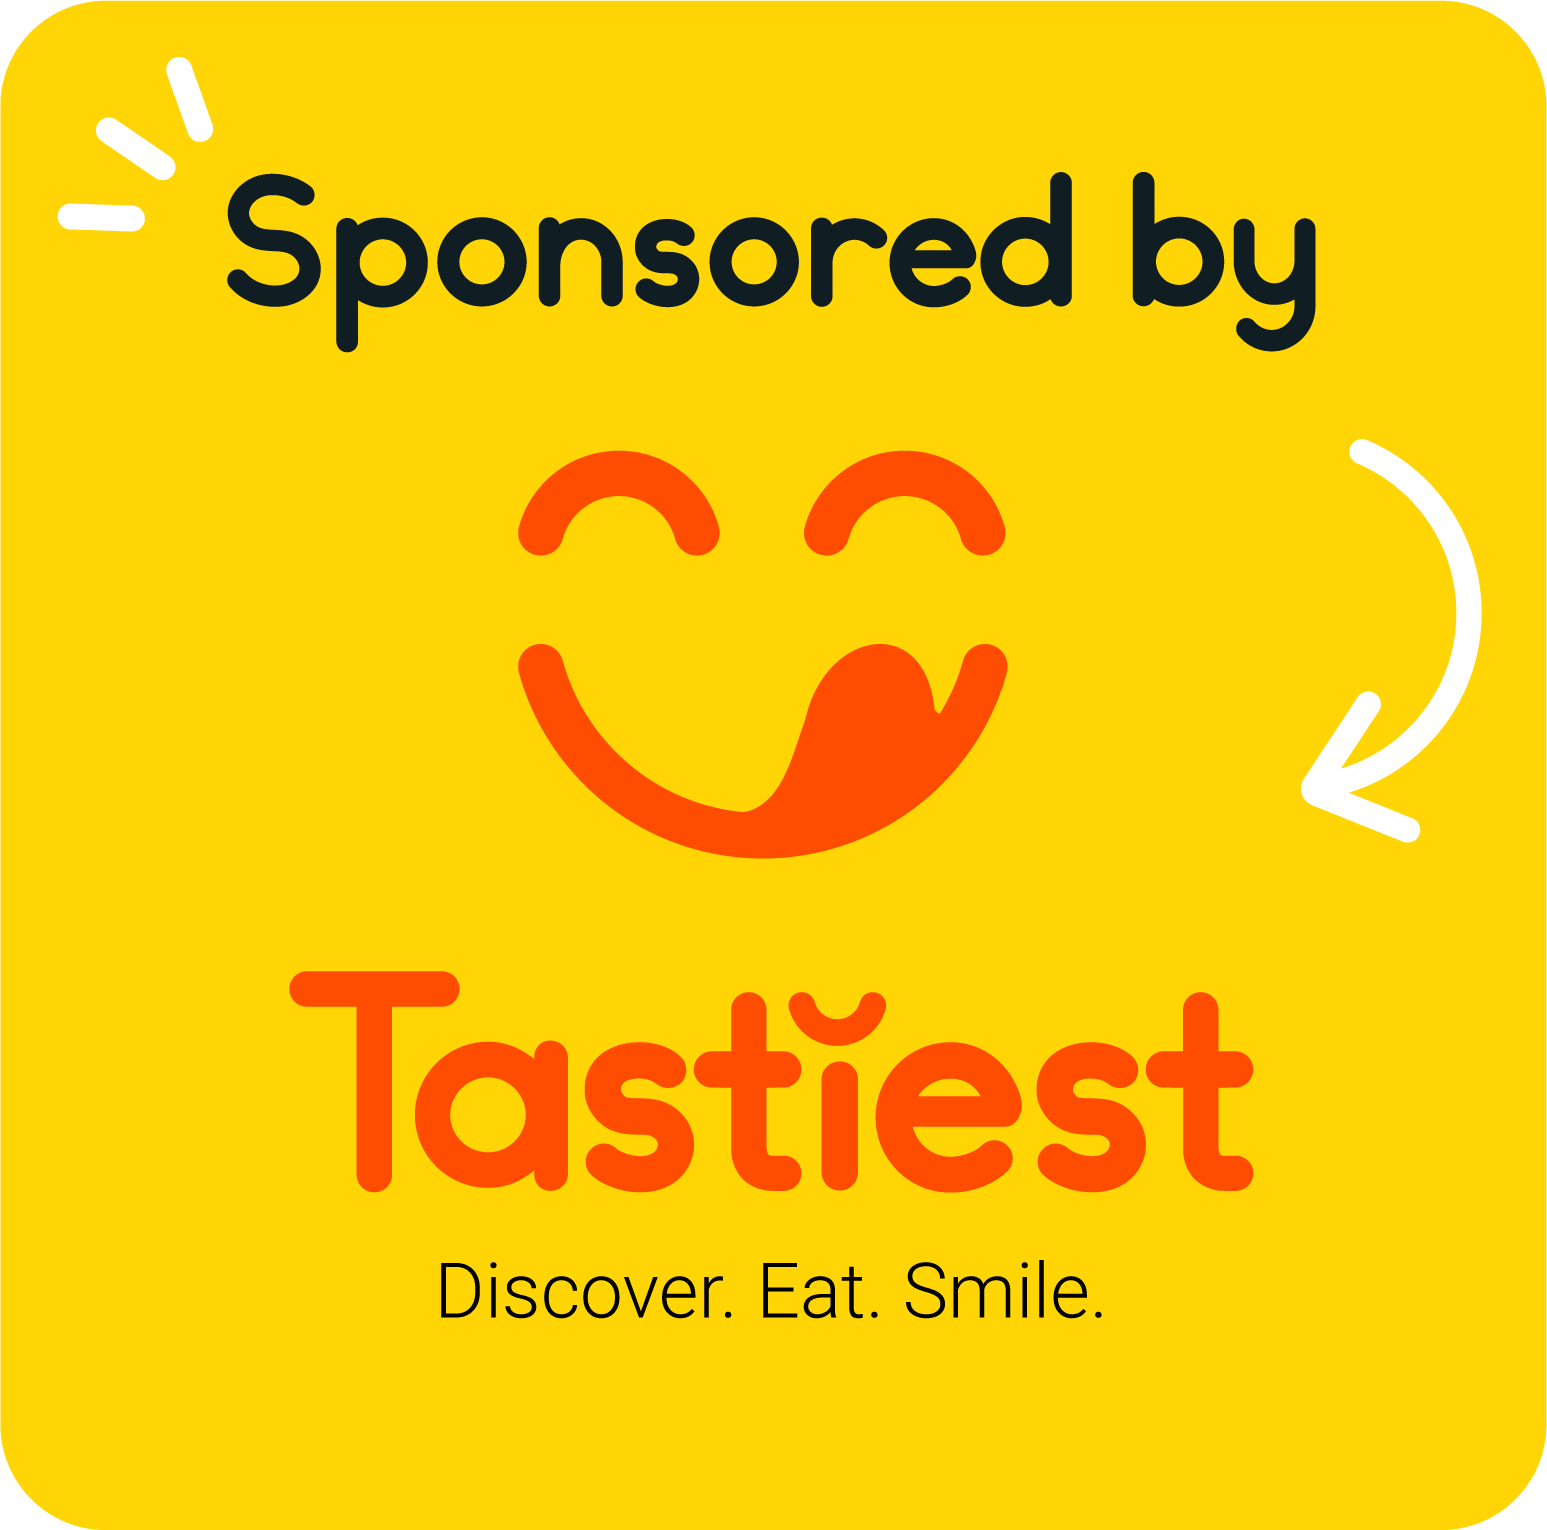 Sponsored by Tastiest | Only the best food in London. Exclusive offers. Never have disappointing experiences again. Fast, simple & secure.